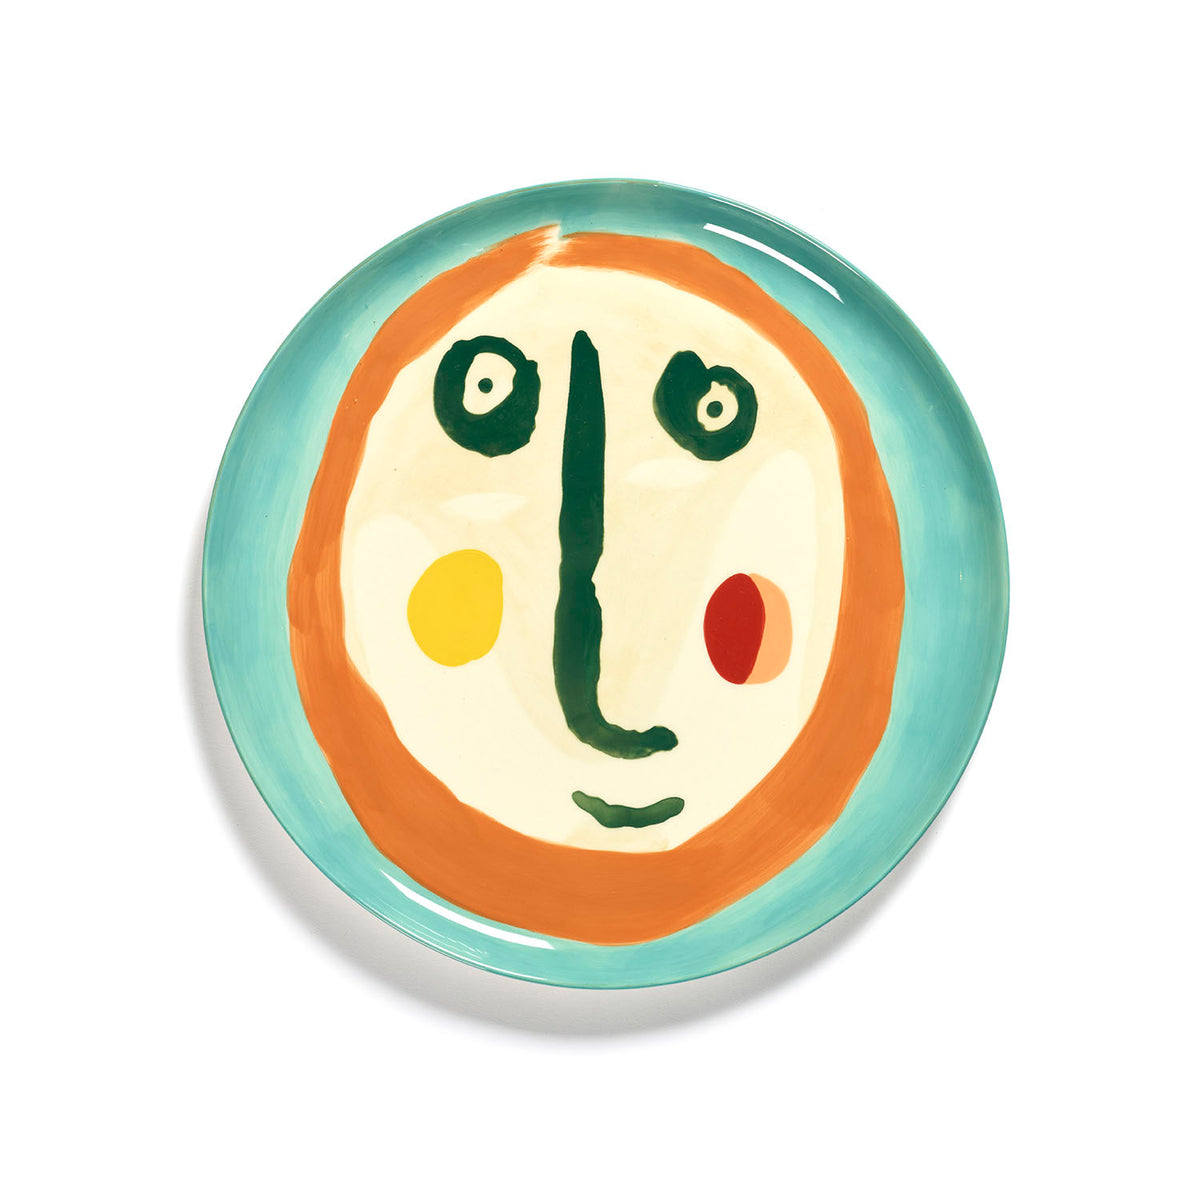 Ottolenghi for Serax Feast collection; serving plate, with face 2 design.